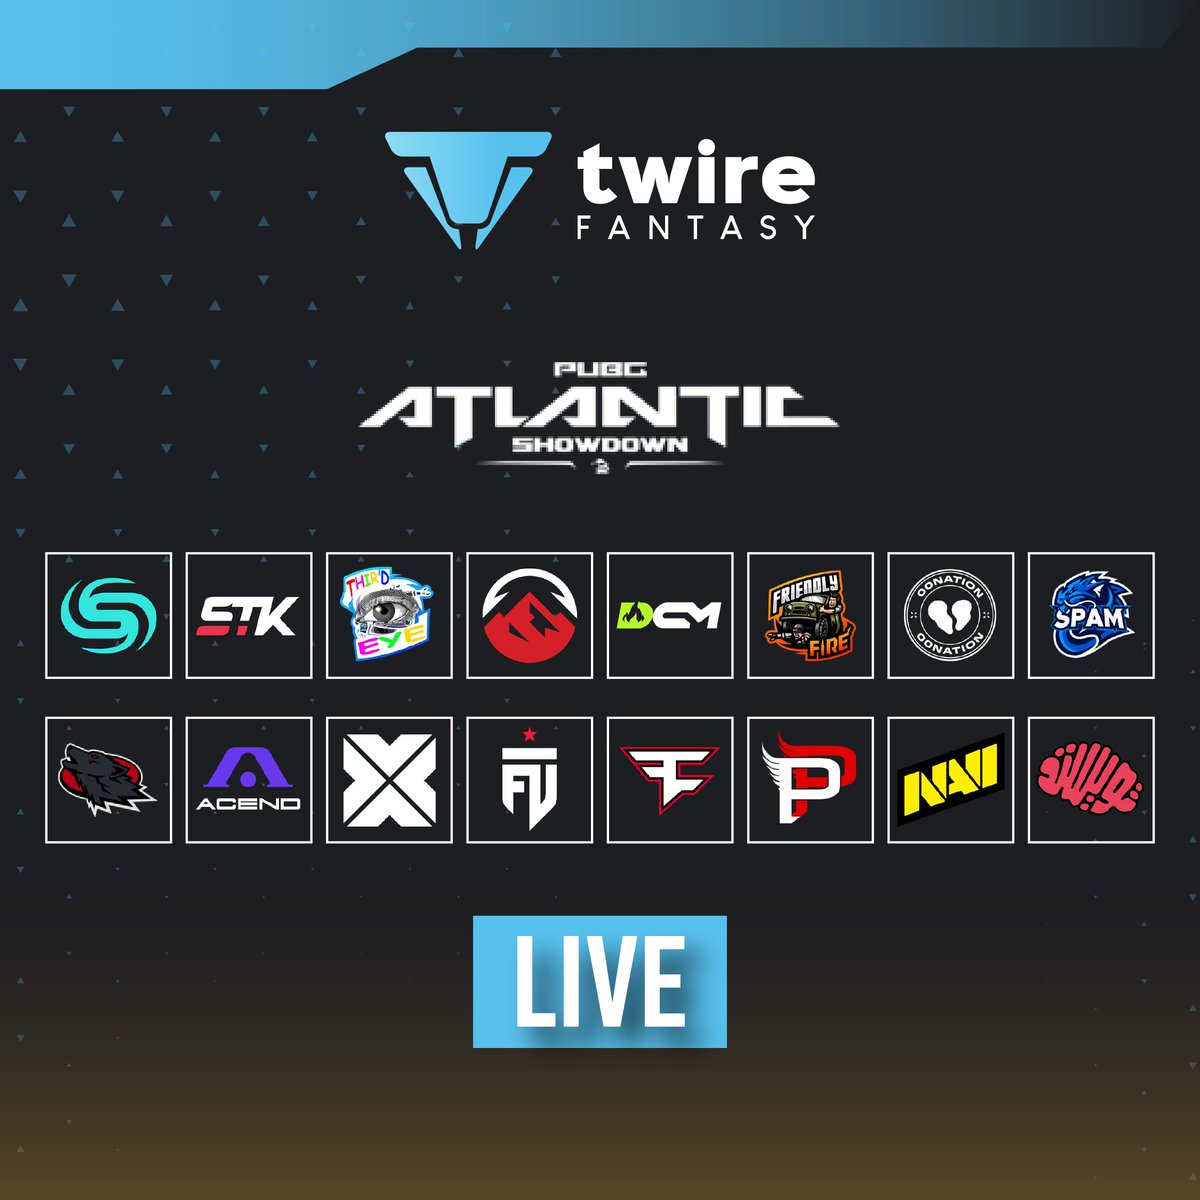 🪂 The PUBG ATLANTIC SHOWDOWN is already LIVE on Twire Fantasy! 🛡 You have 2 days to build your roster with some of the best players from #PAS and #PEC teams. 🗓 Build your team now here: ➡ fantasy.twire.gg/en/tournament/… #TwireFantasy #PUBGEsports